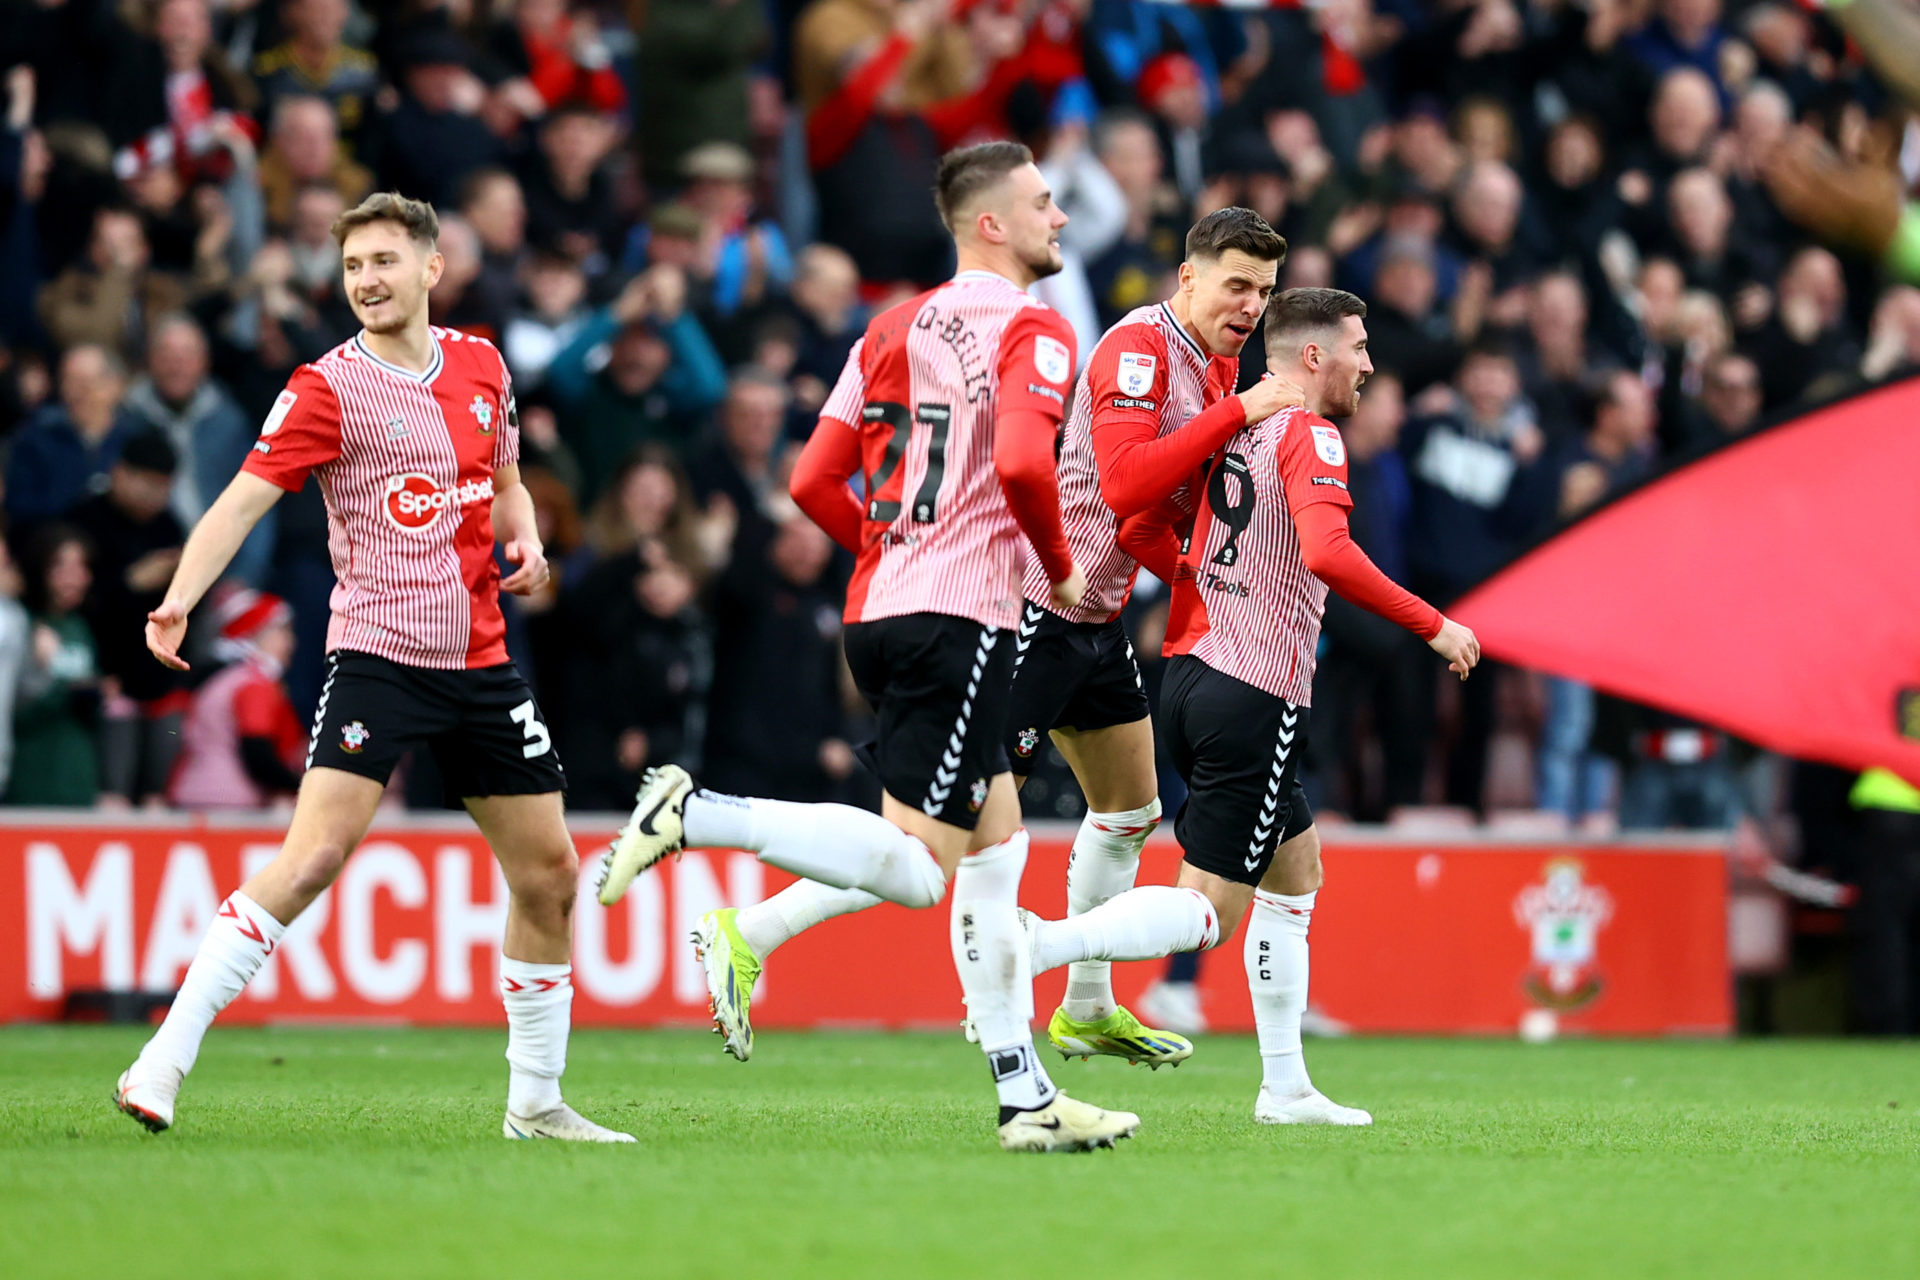 ‘Amazing’ player who’s hardly started will be pivotal to Southampton promotion hopes